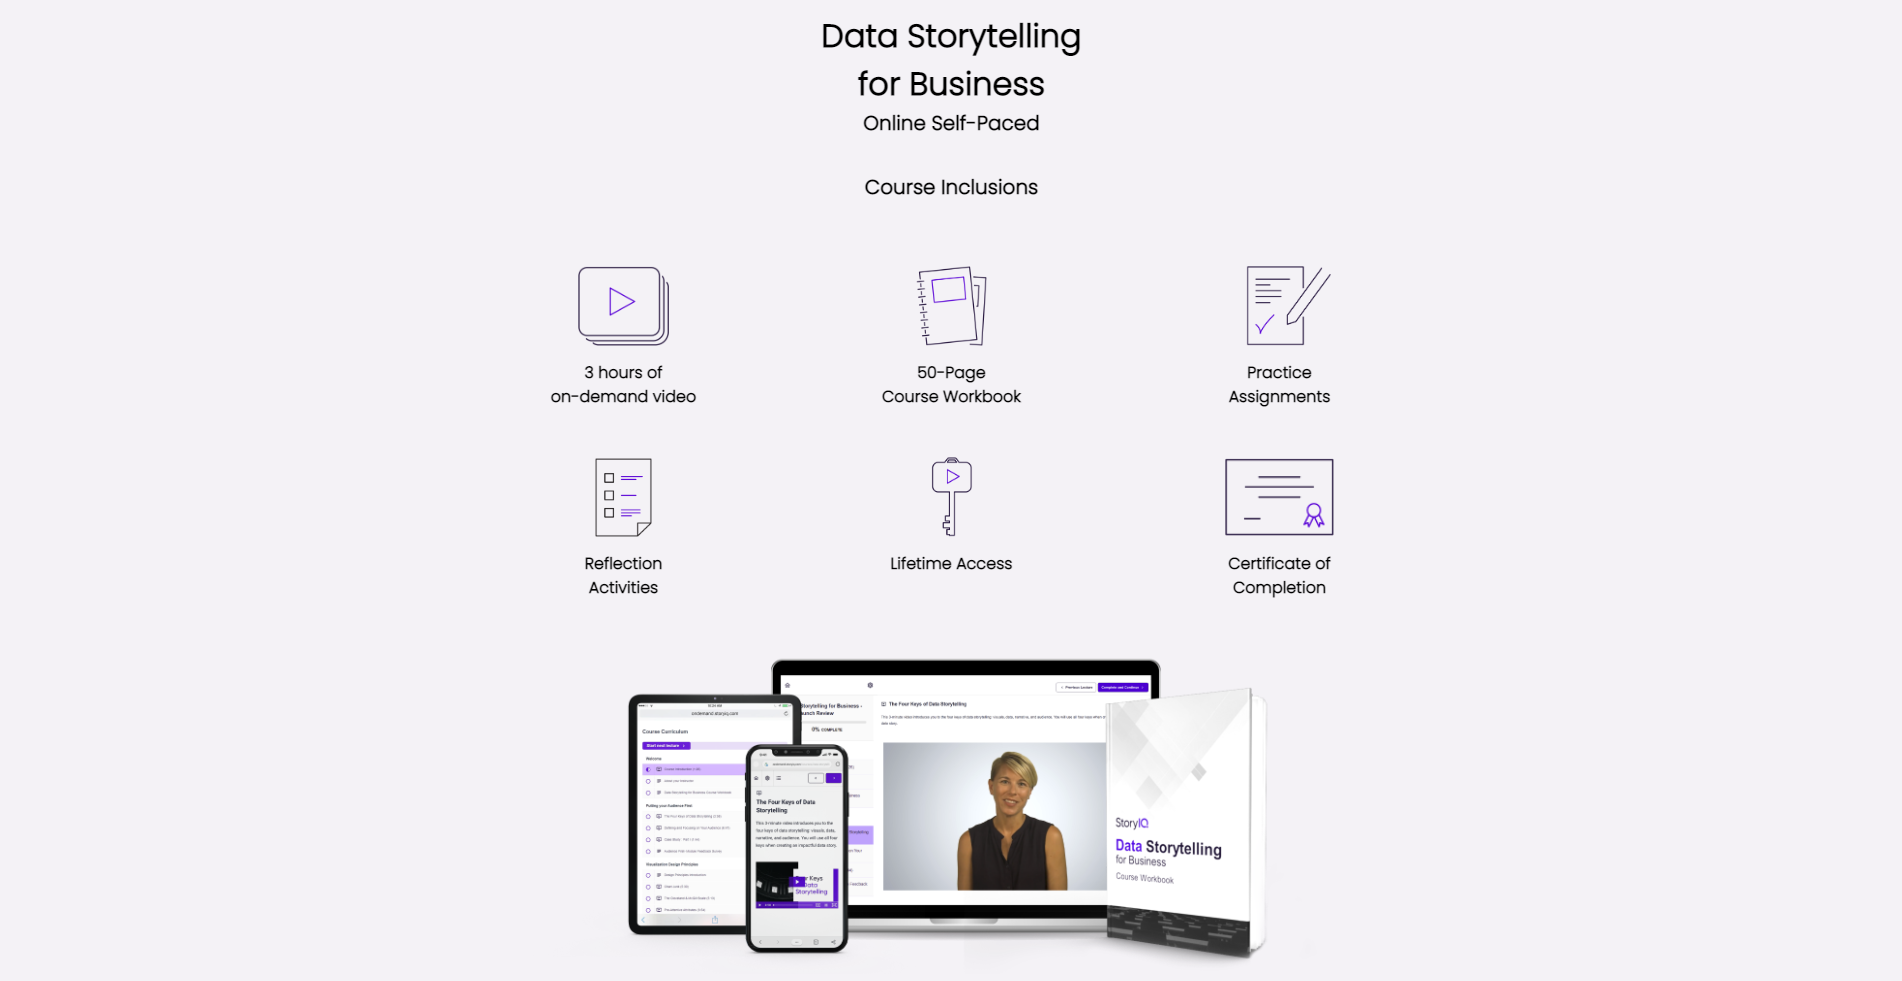 Data Storytelling for Business by Diedre Downing